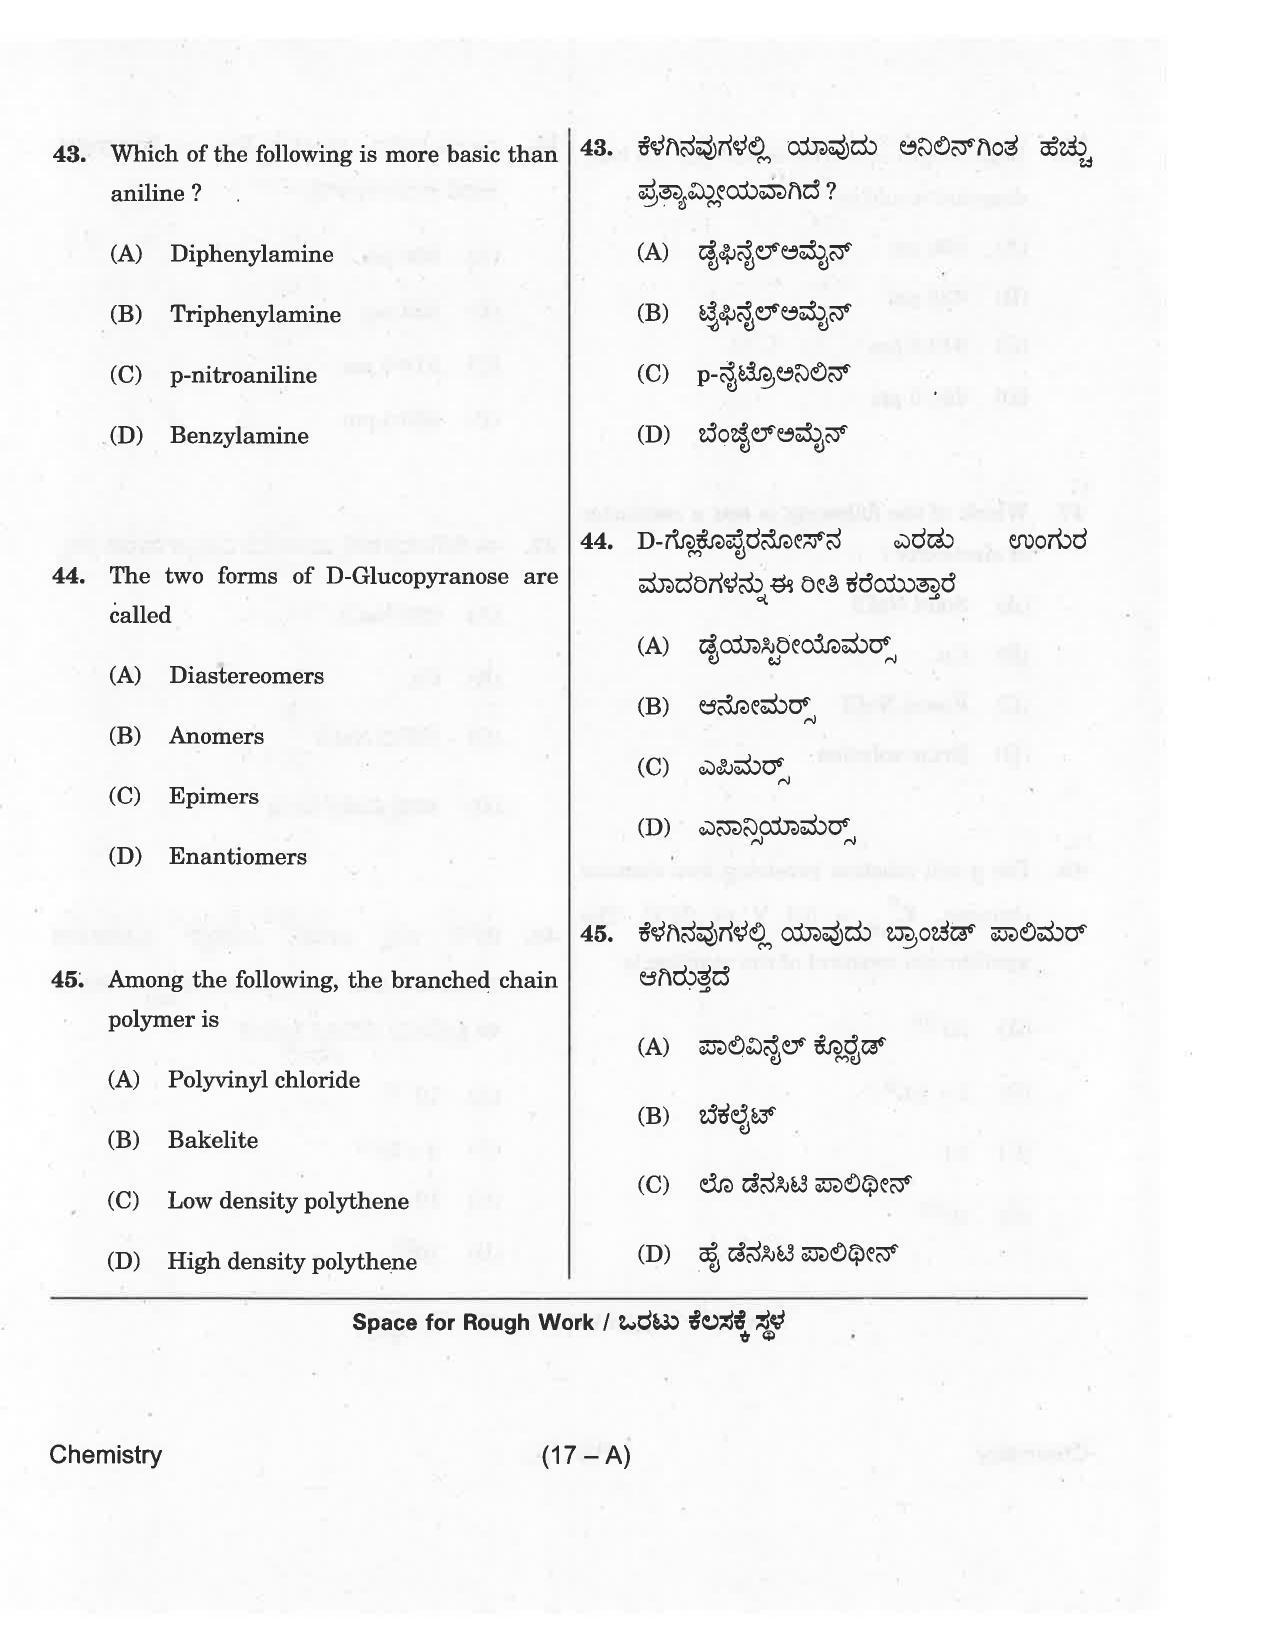 KCET Chemistry 2018 Question Papers - Page 17